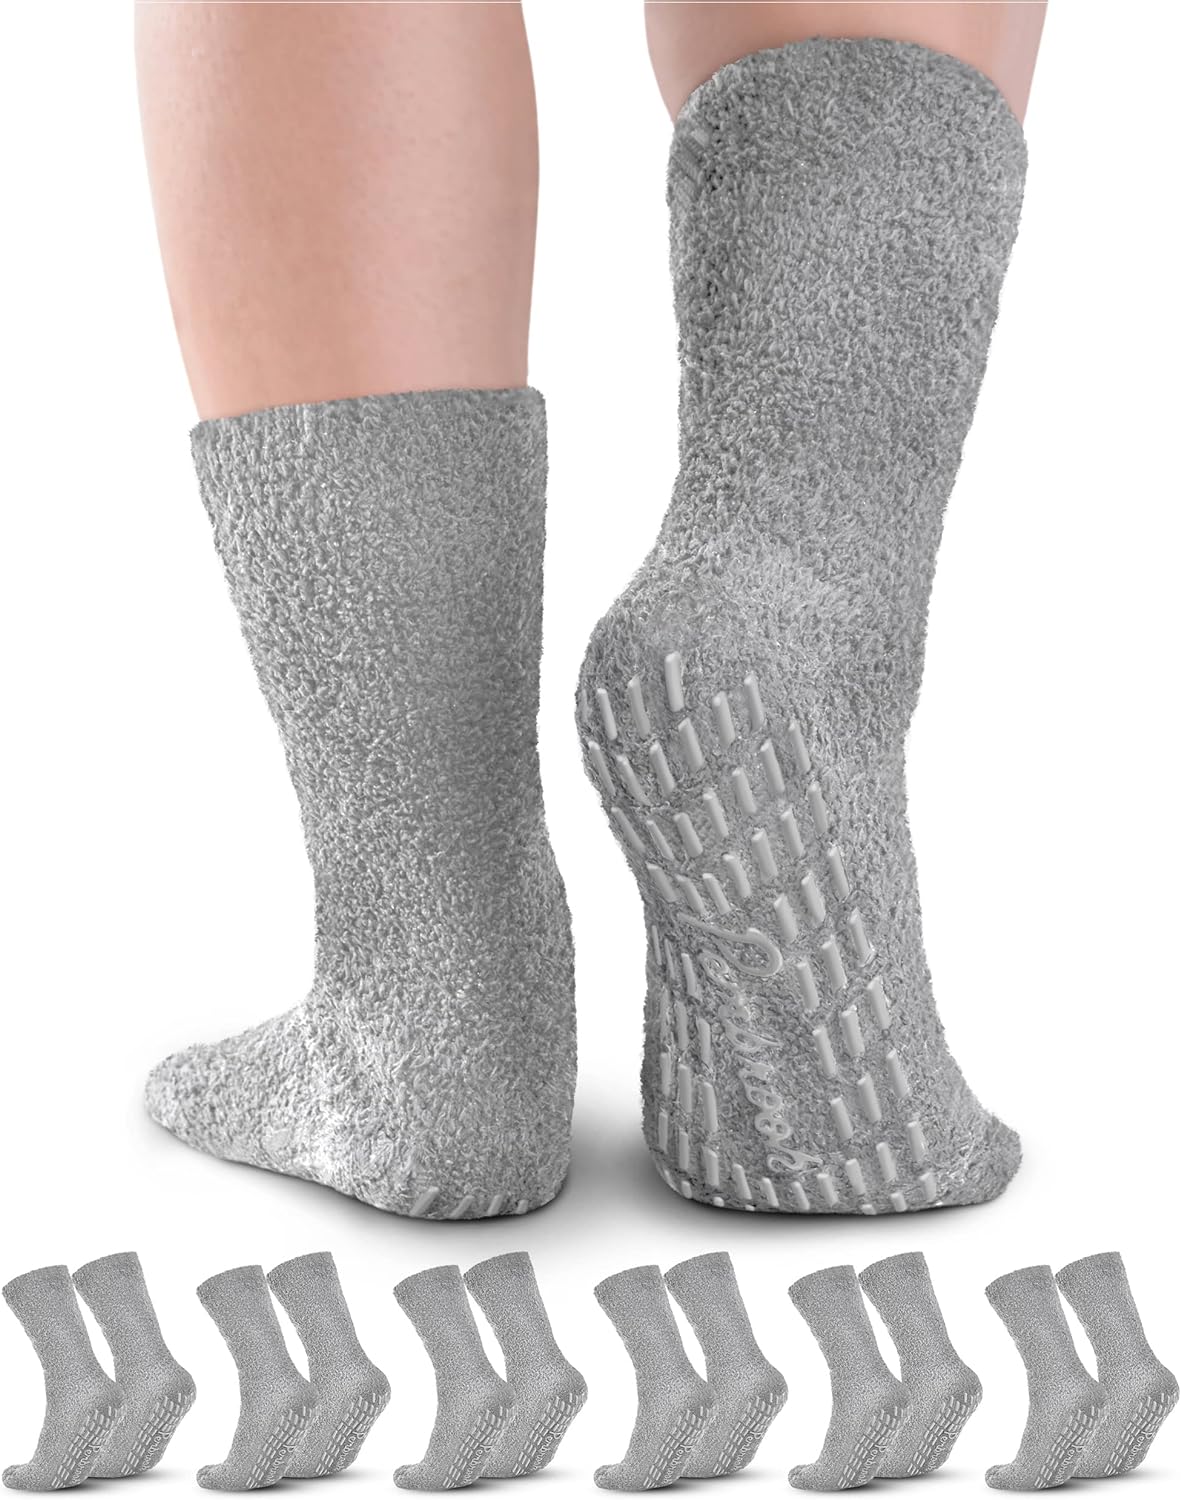 Pembrook Fuzzy Socks with Grips for Women and Men - 6 Pairs Non Skid  Socks/No Slip Fuzzy Socks